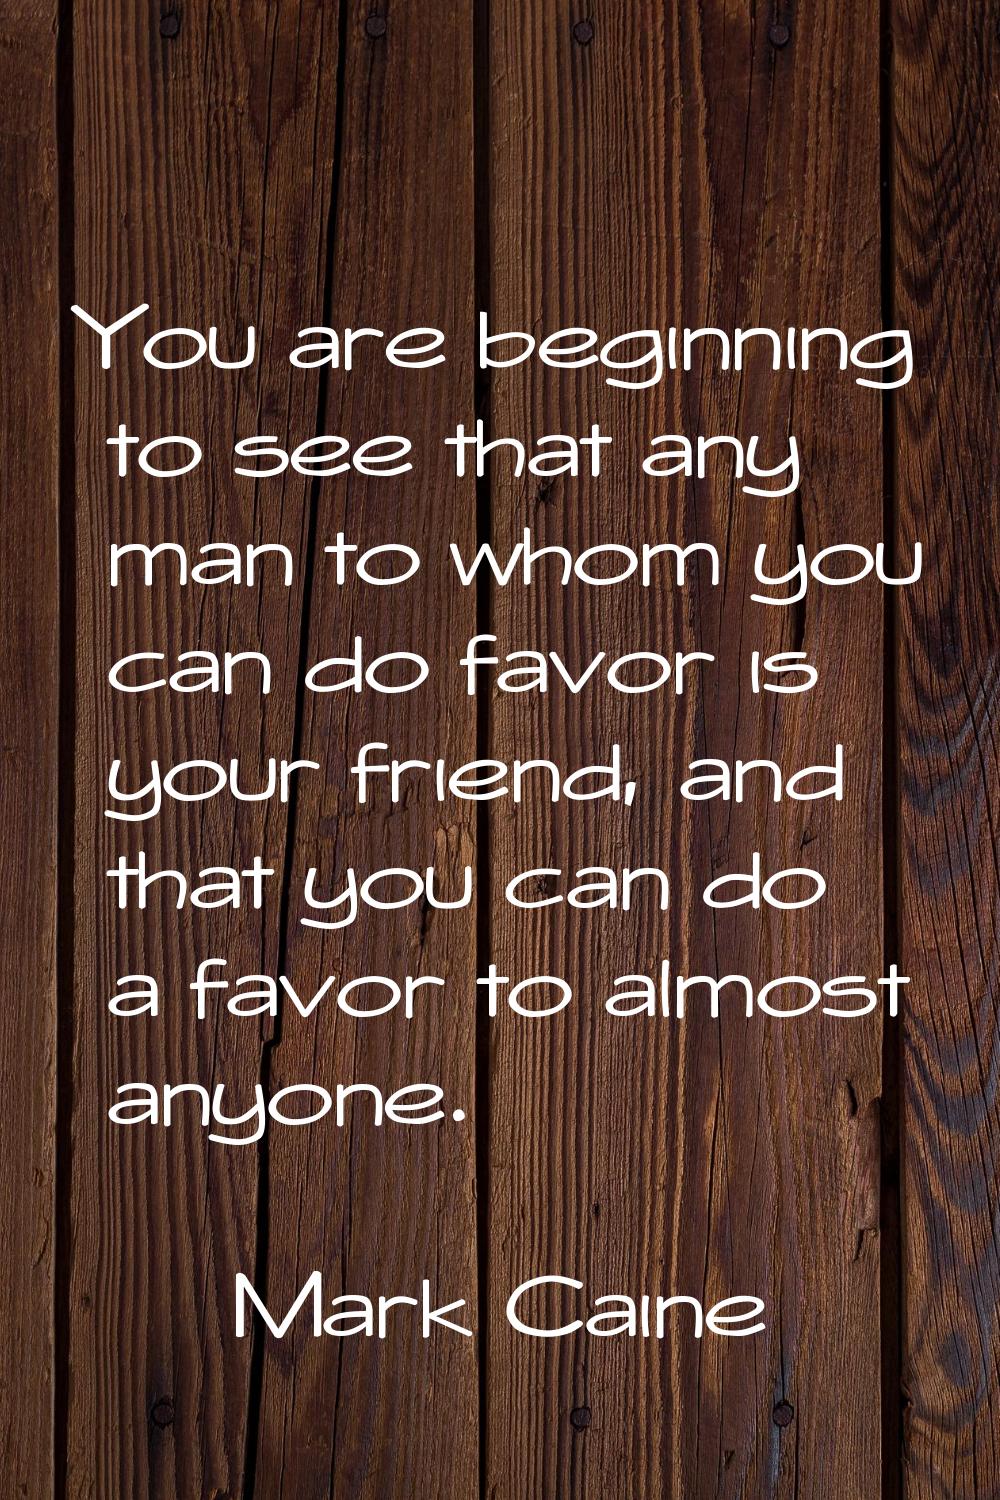 You are beginning to see that any man to whom you can do favor is your friend, and that you can do 